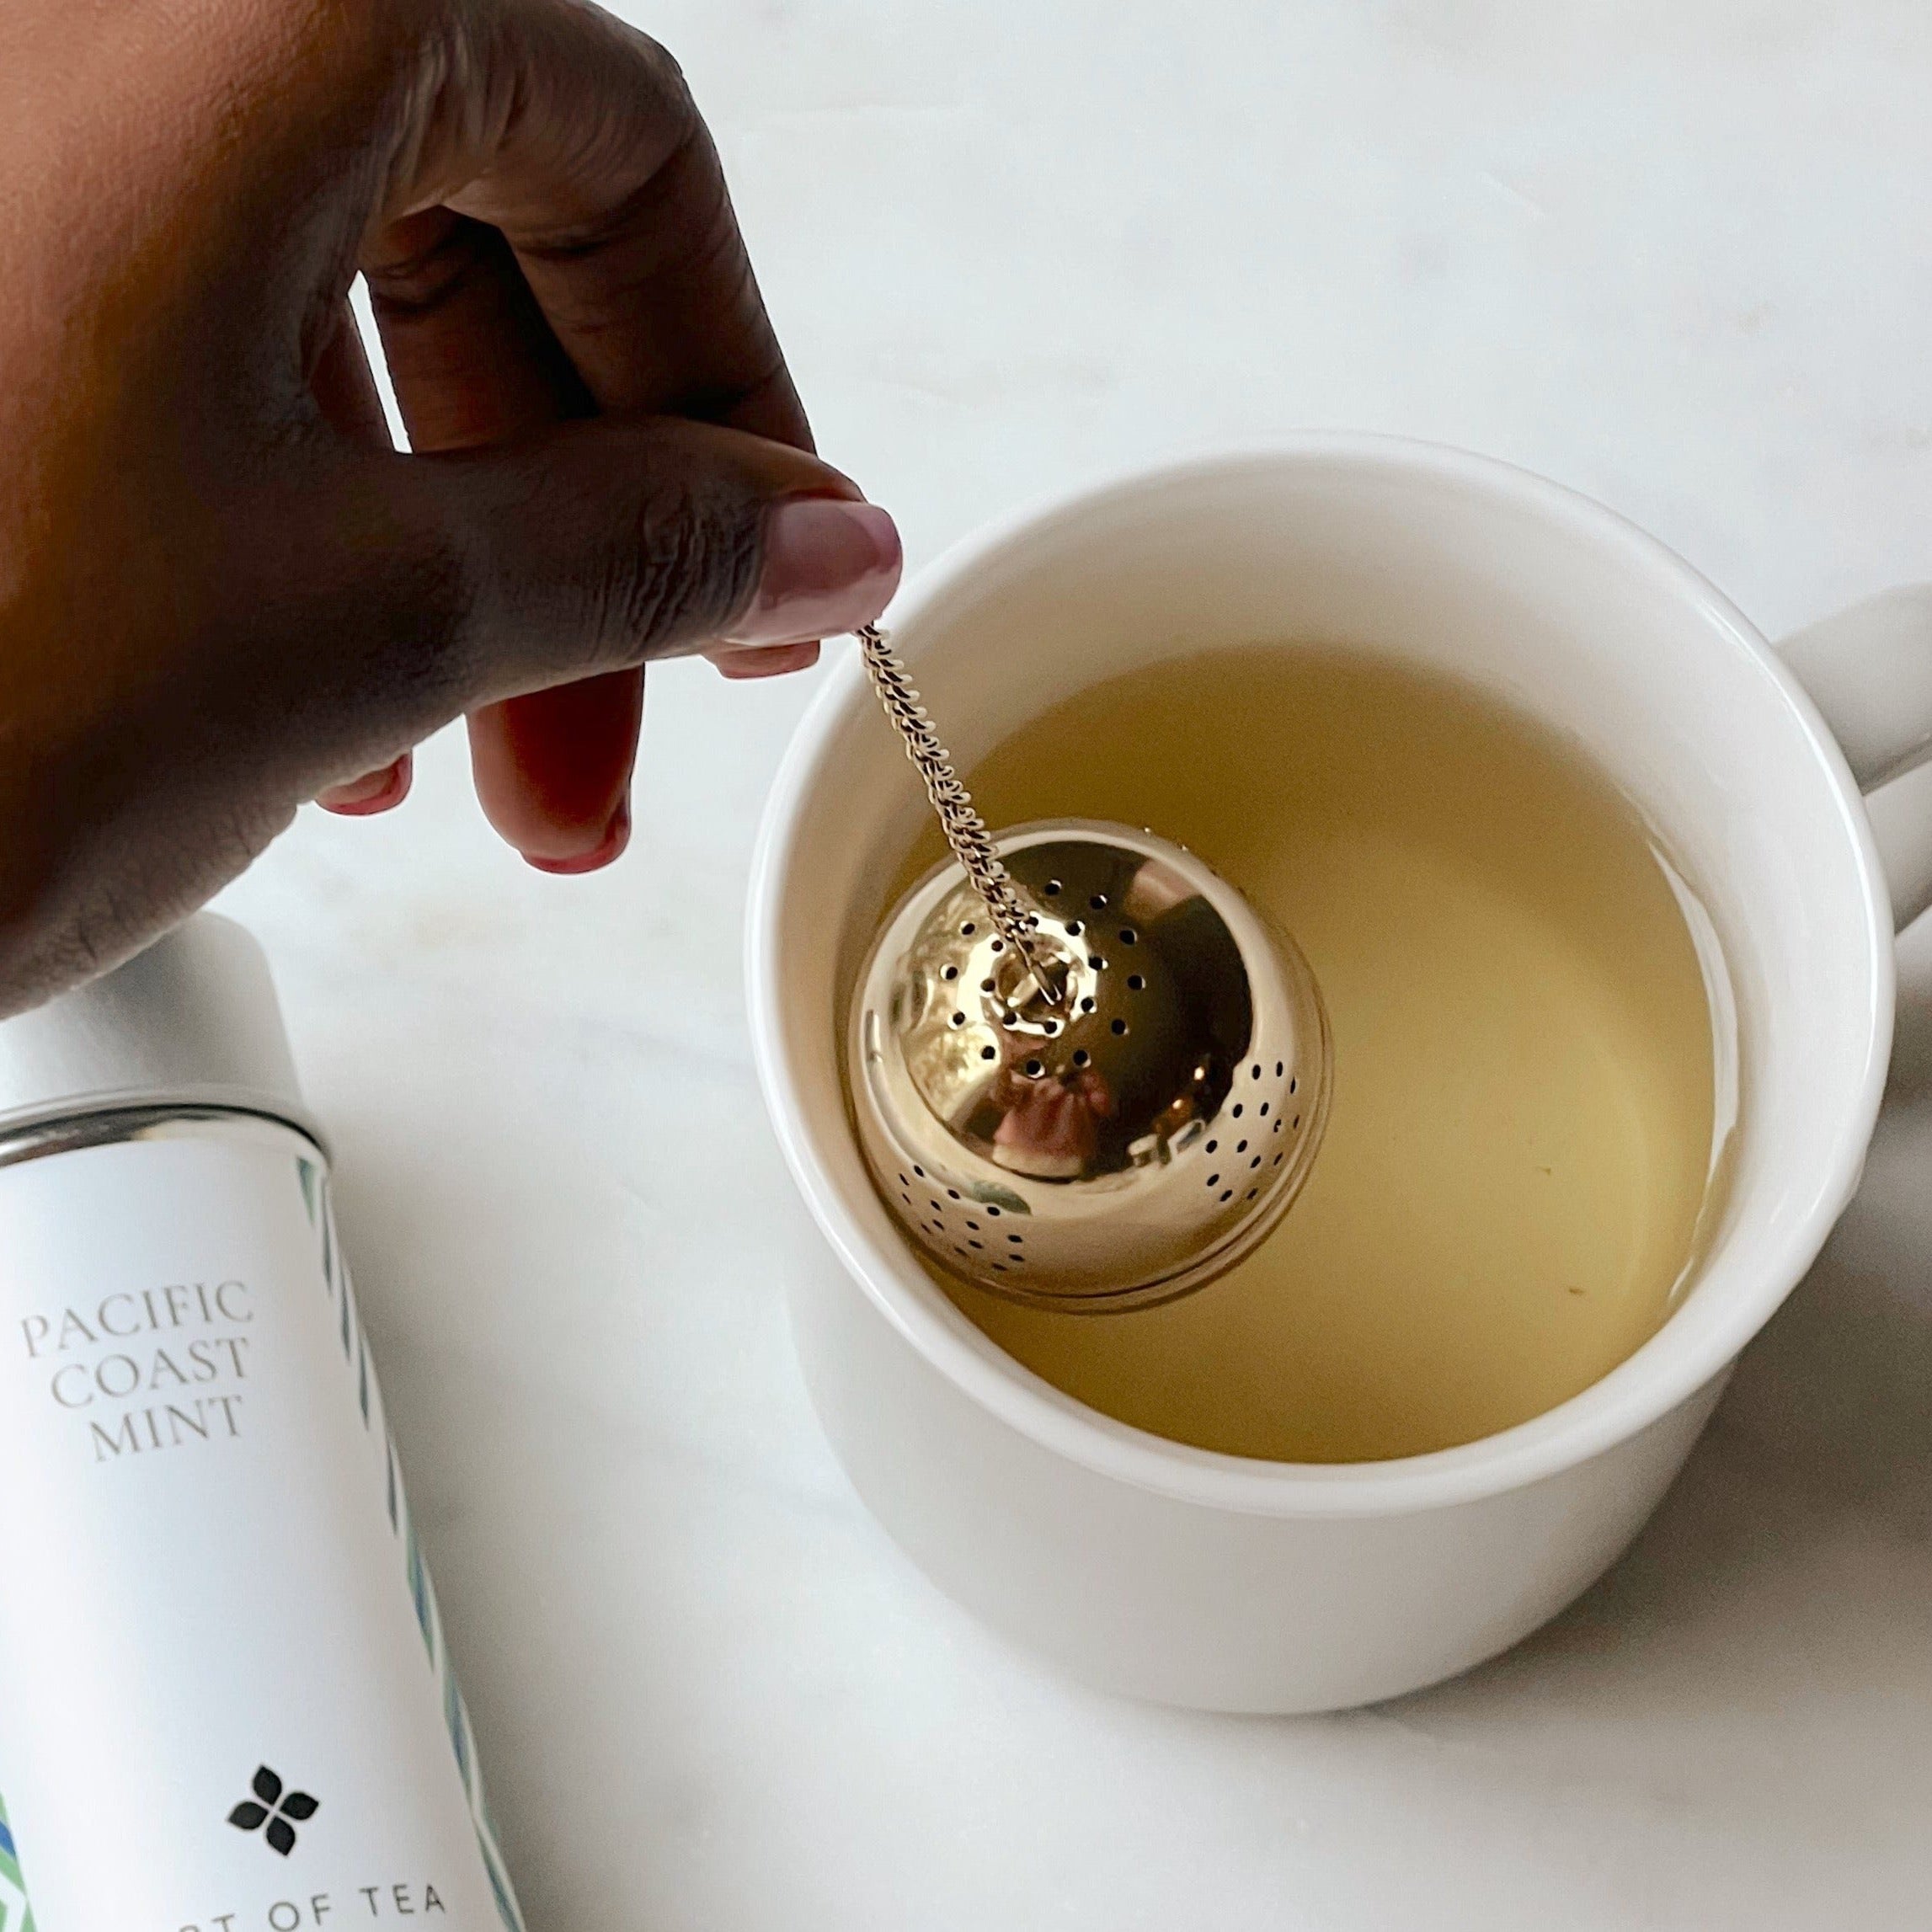 A woman's hand dipping a gold acorn tea infuser into a light grey ceramic mug holding hot water. Next to the mug is Art of Tea Pacific Coast Mint tea in a tin.